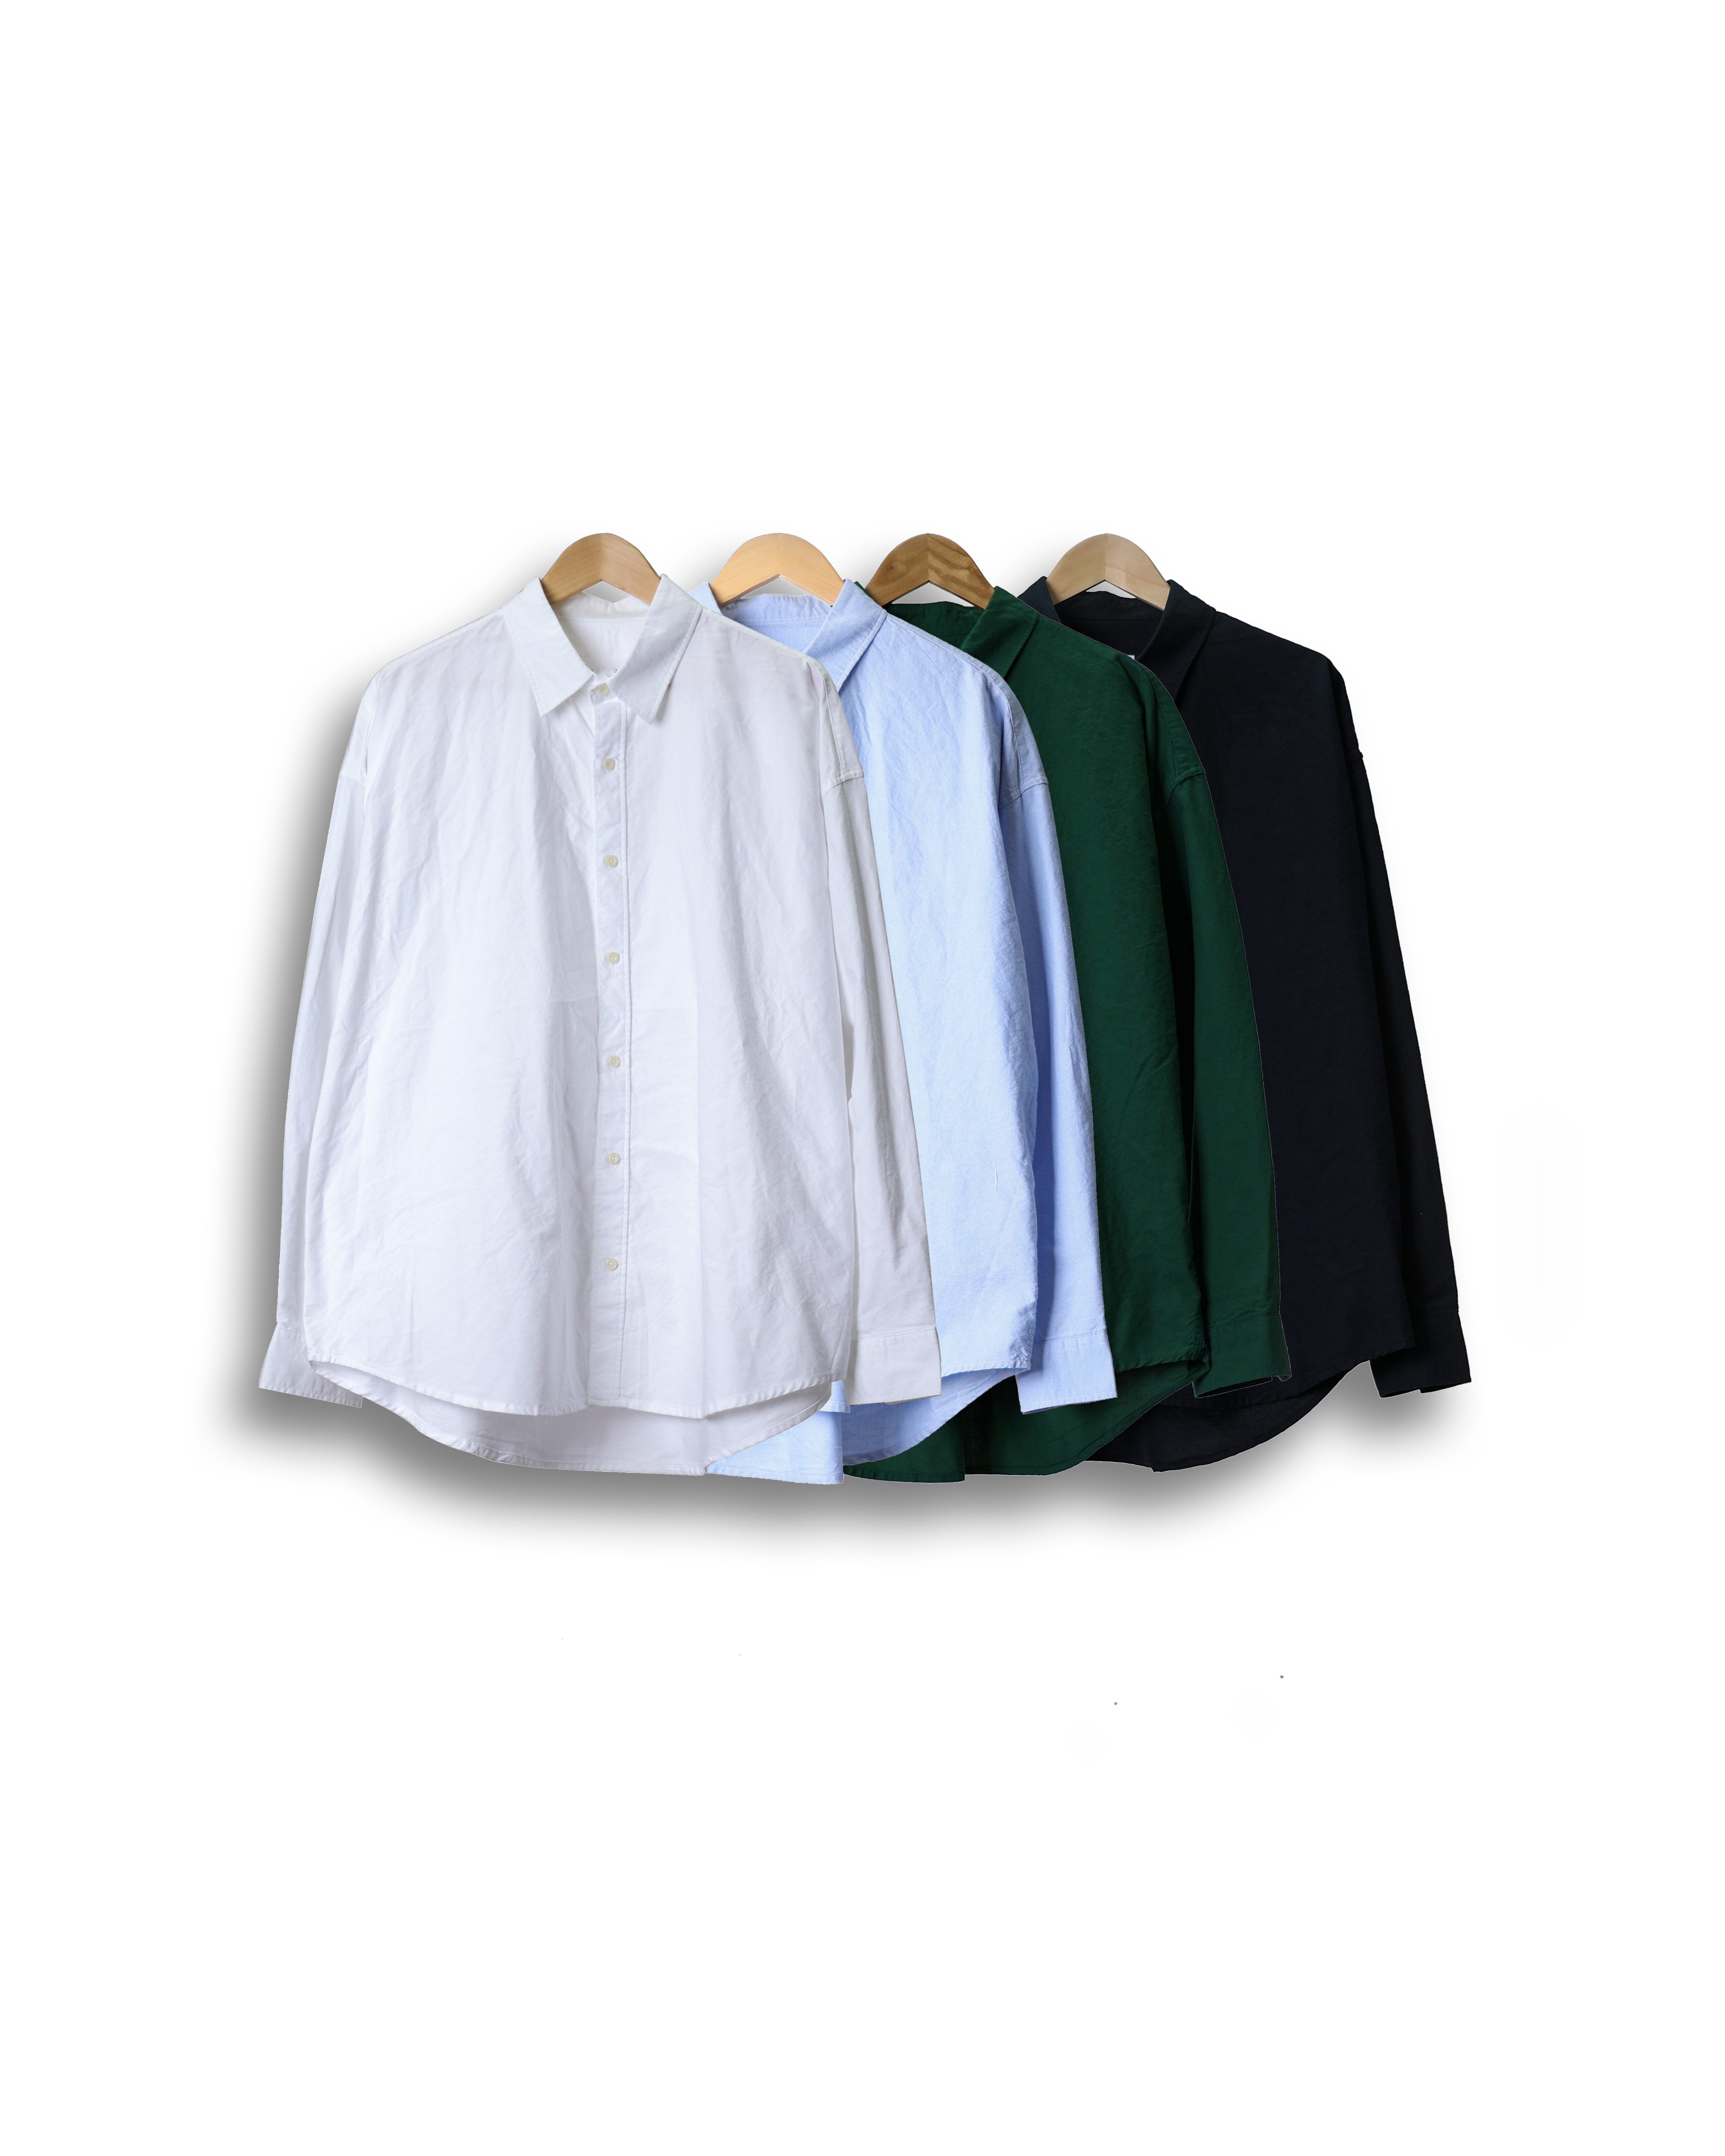 NOOR Daily Standard Oxford Over Shirts (Navy/Green/Sky Blue/White)